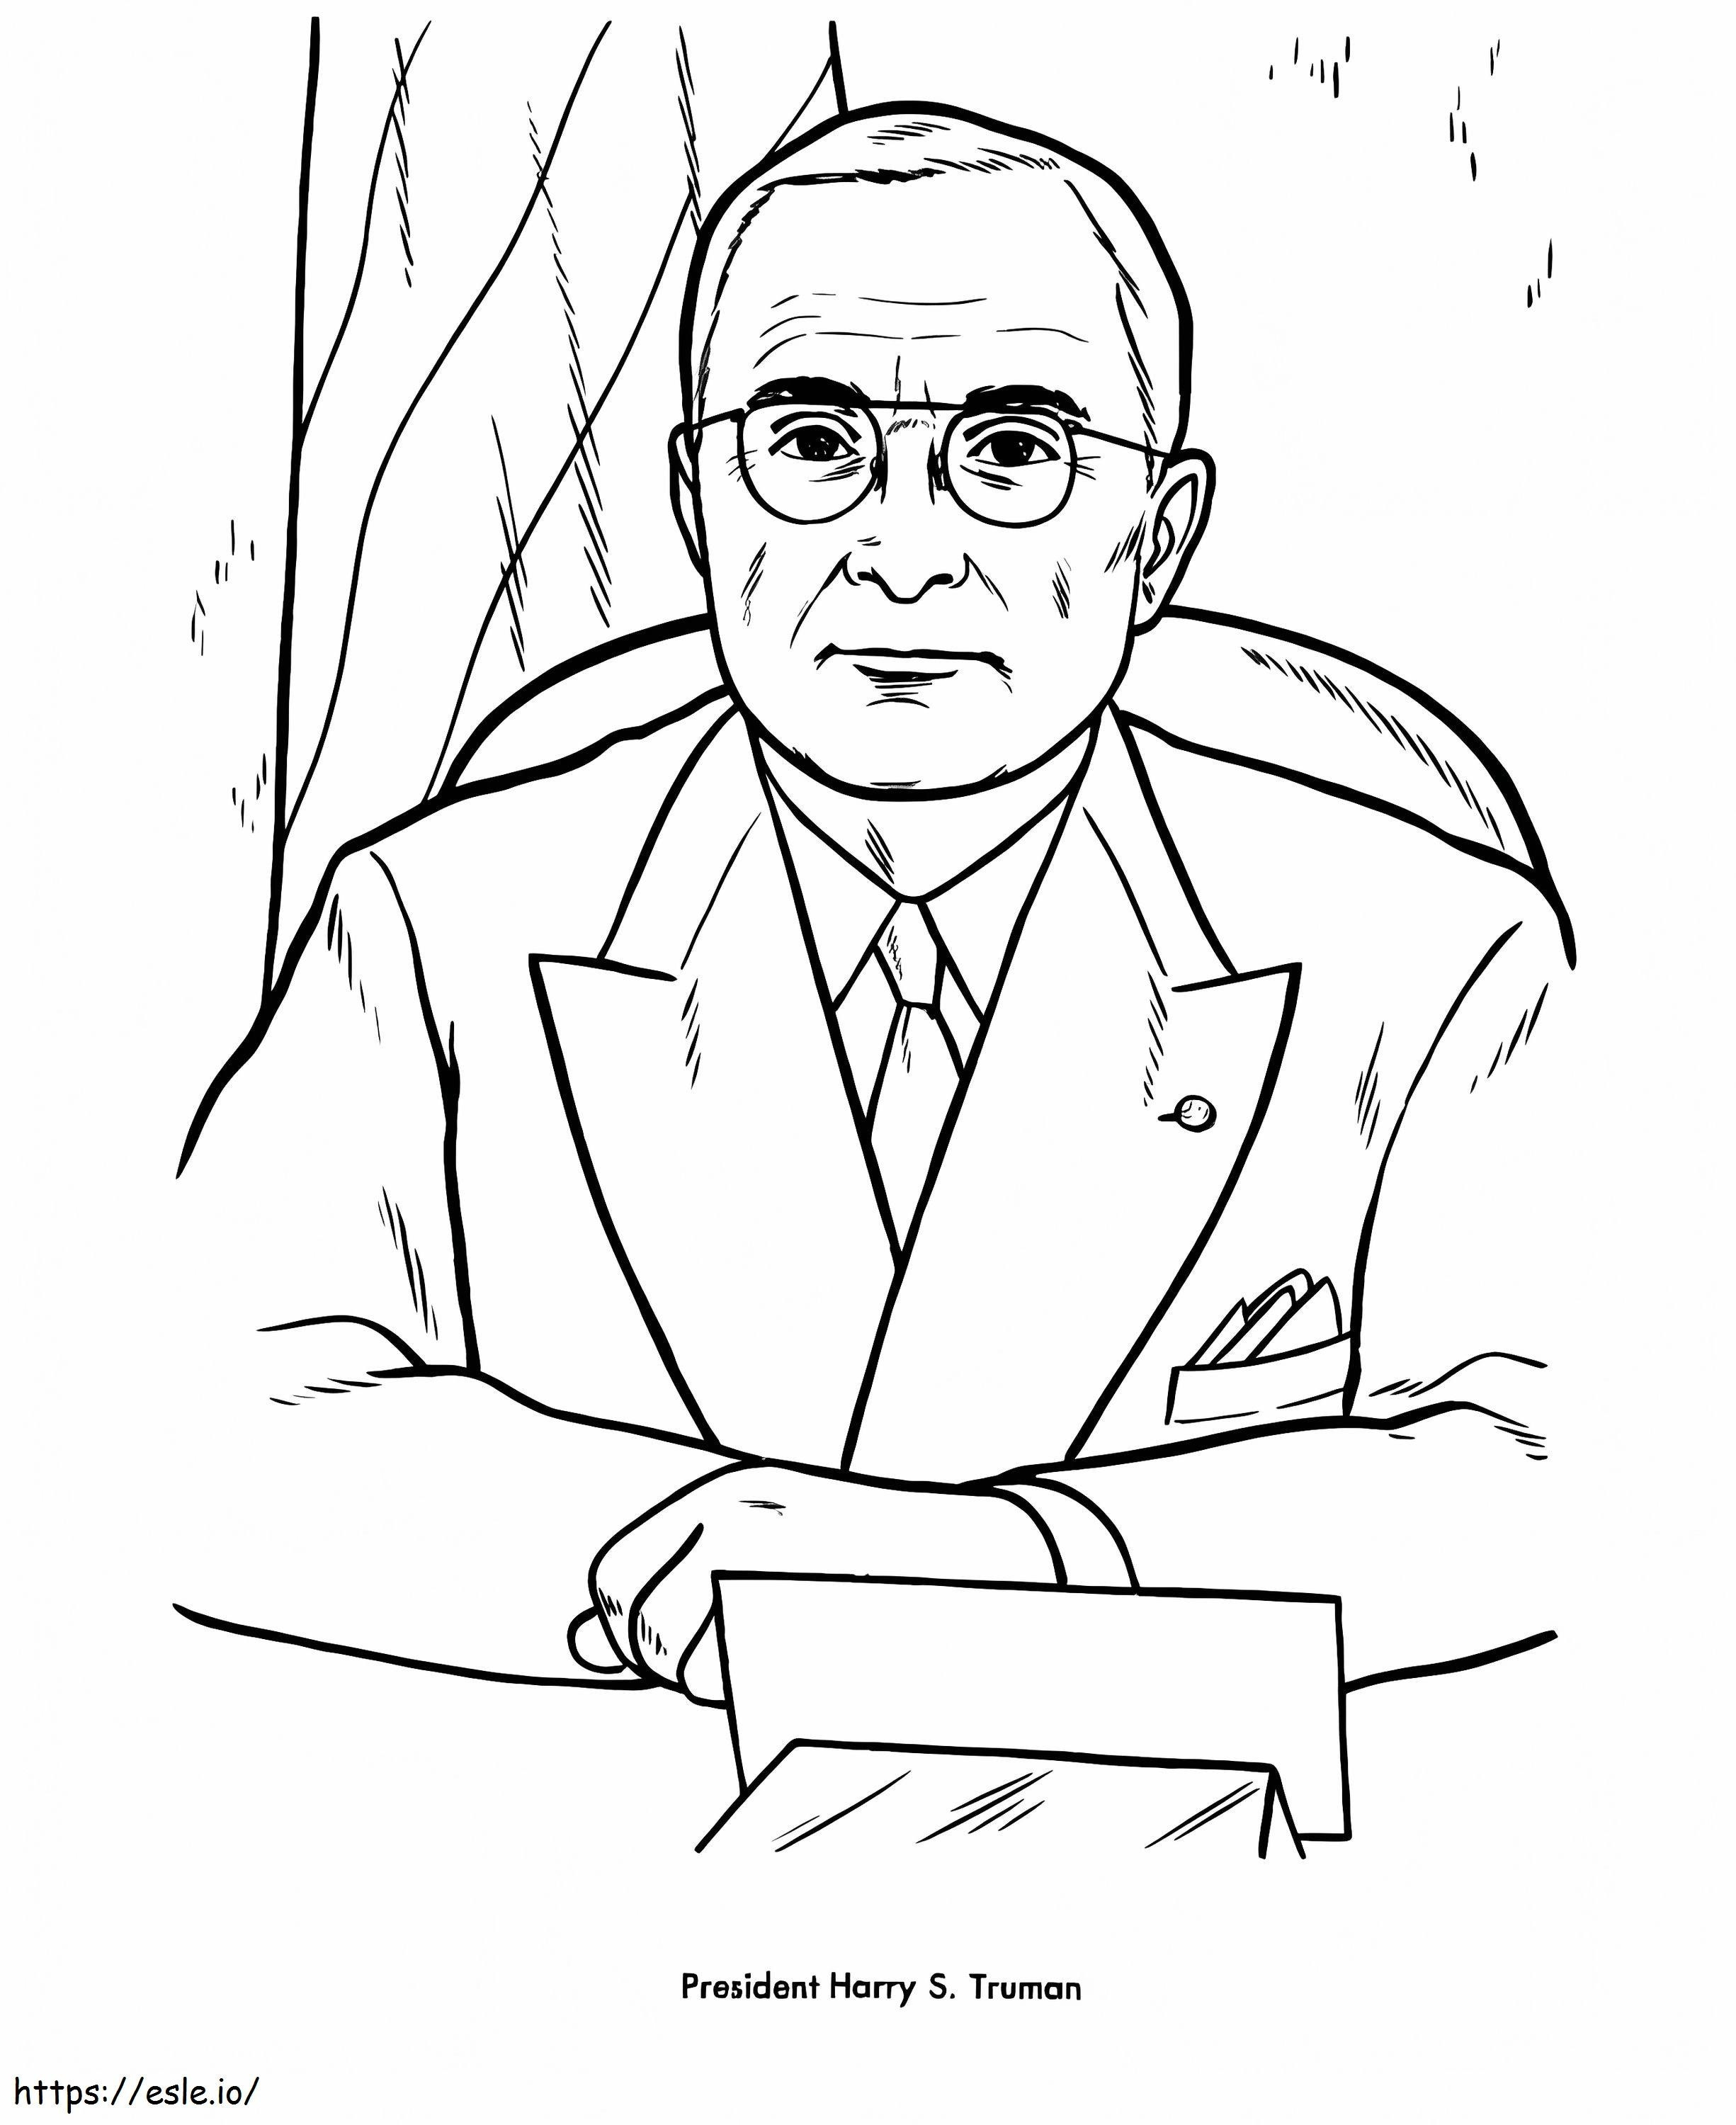 President Harry S. Truman coloring page